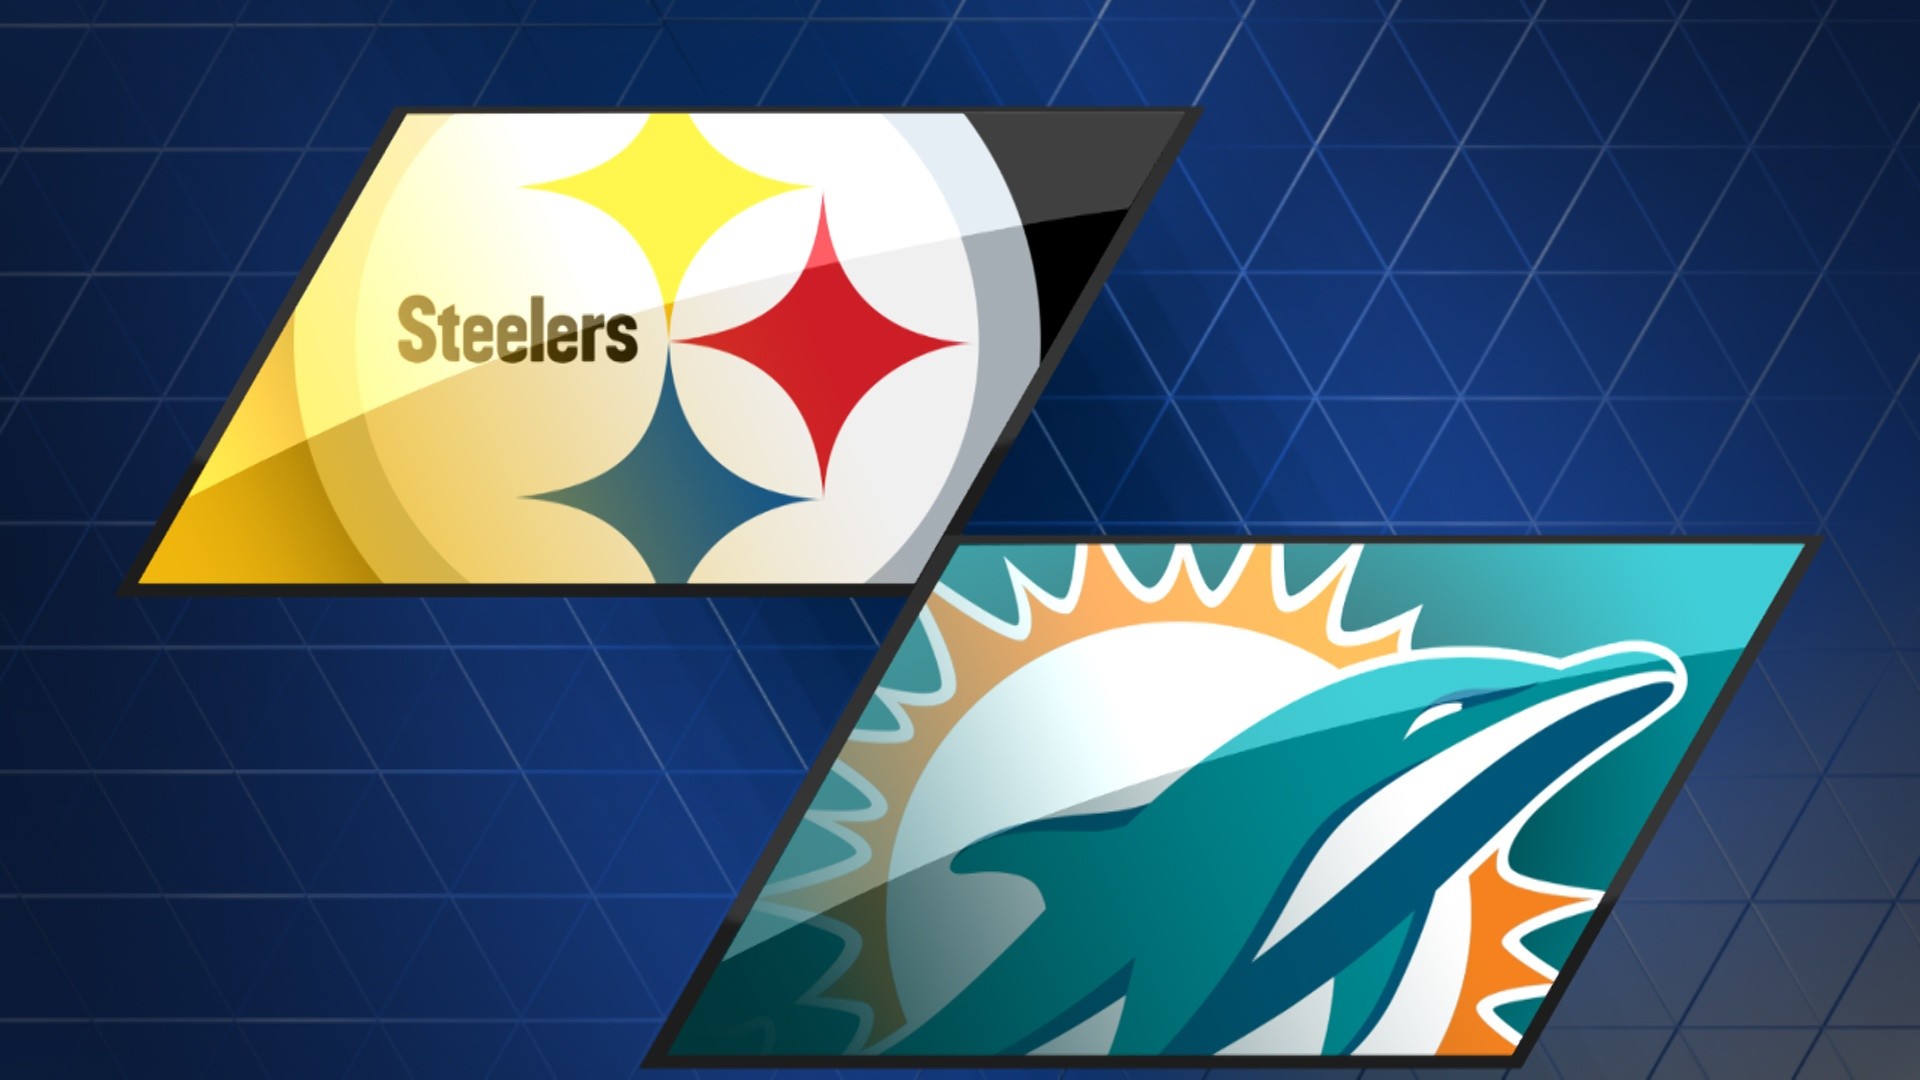 1920x1080 Steelers dolphins playoff game set for sunday afternoon